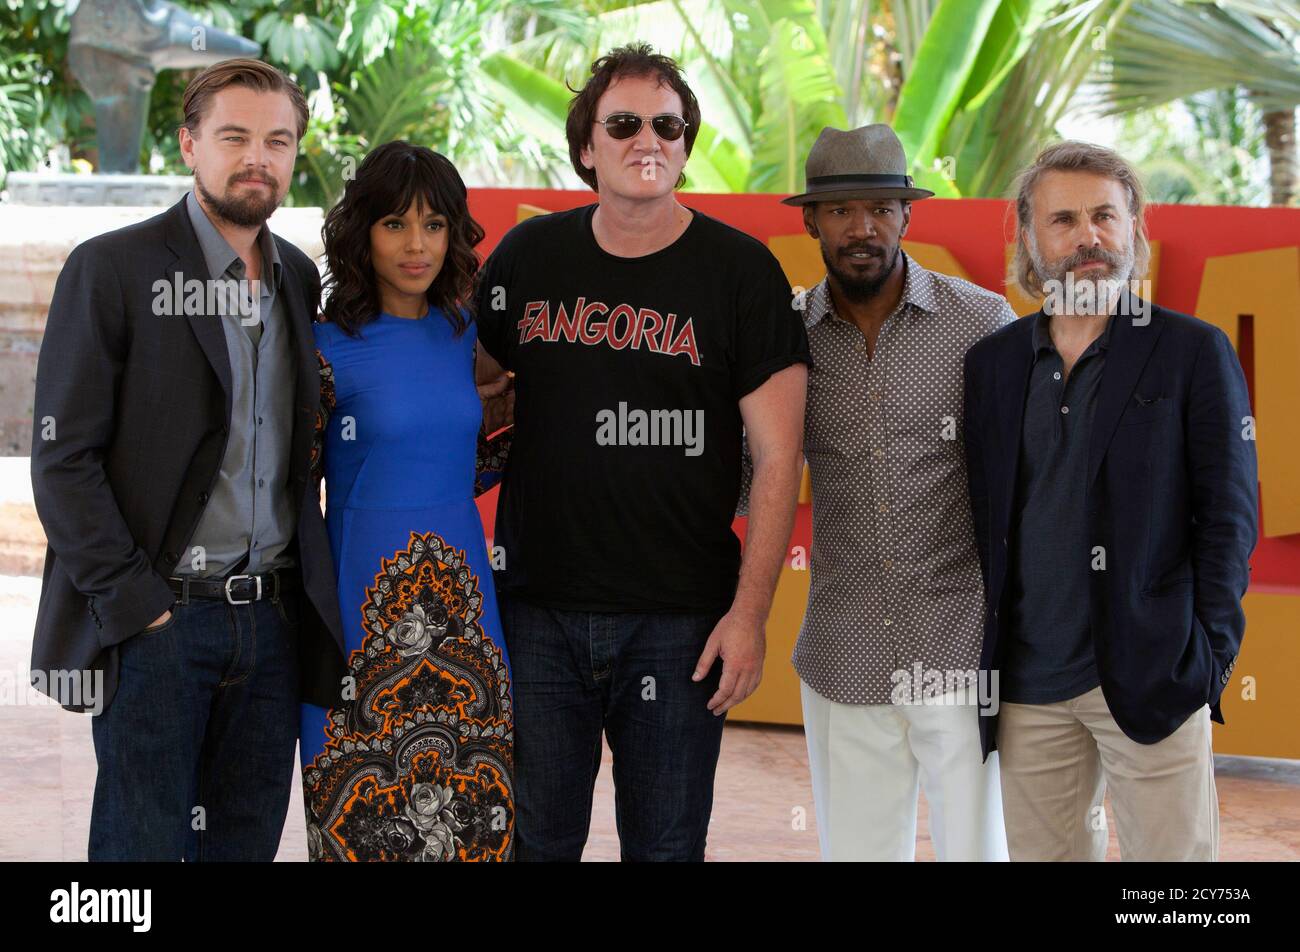 Director Quentin Tarantino (C) poses with (L-R) U.S actors Leonardo  DiCaprio, Kerry Washington, Jamie Foxx and Austrian actor Christoph Waltz,  during the launch of their film 